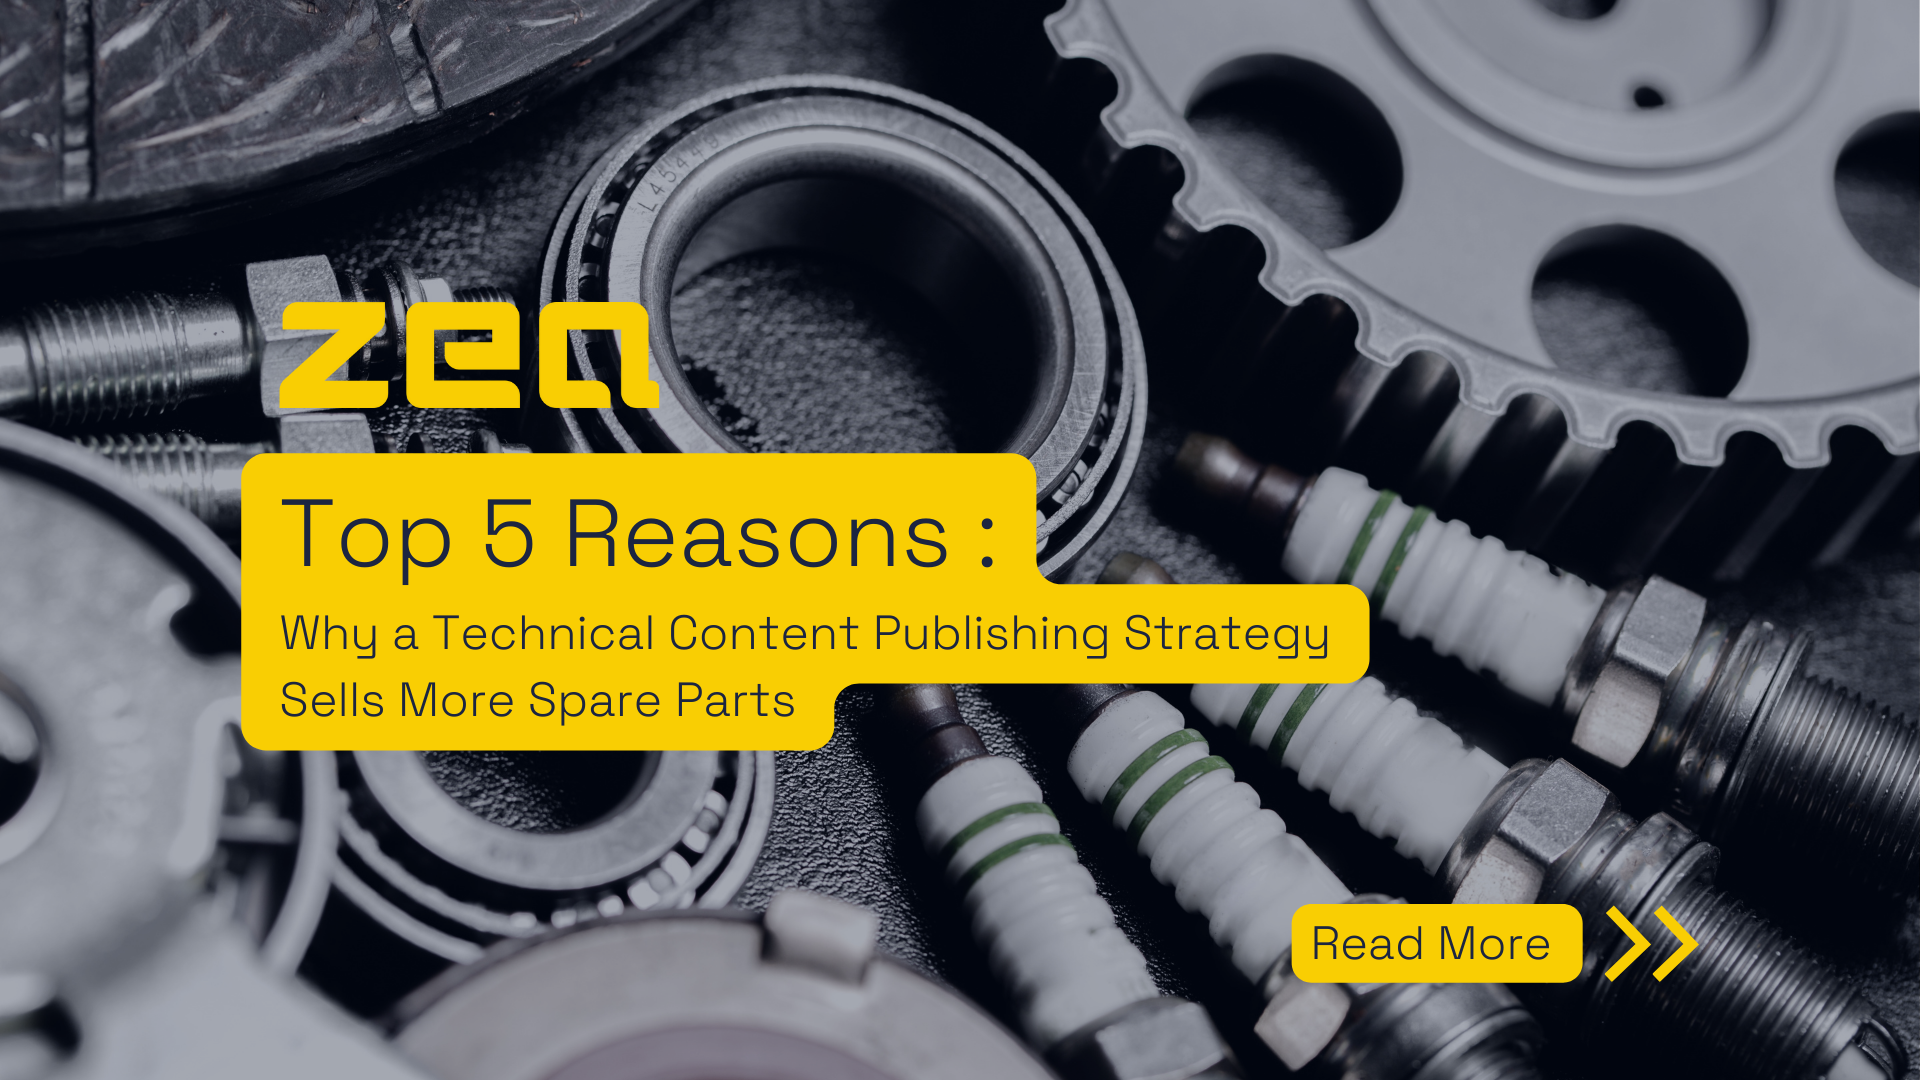 Technical Content Publishing Strategy That Sells More Spare Parts